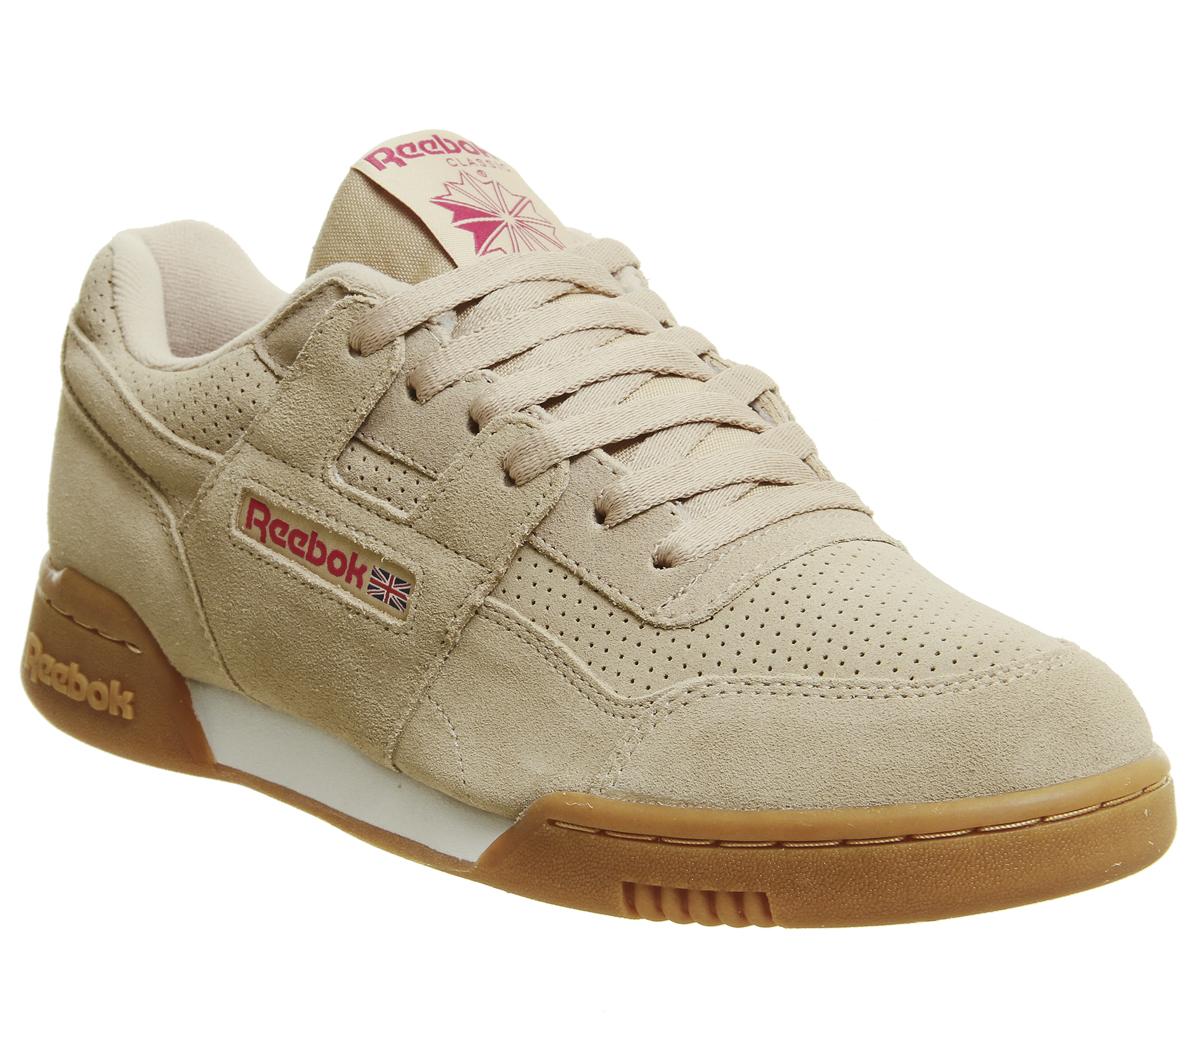 Reebok Workout Plus Trainers Sahara Pink White Gum His Trainers